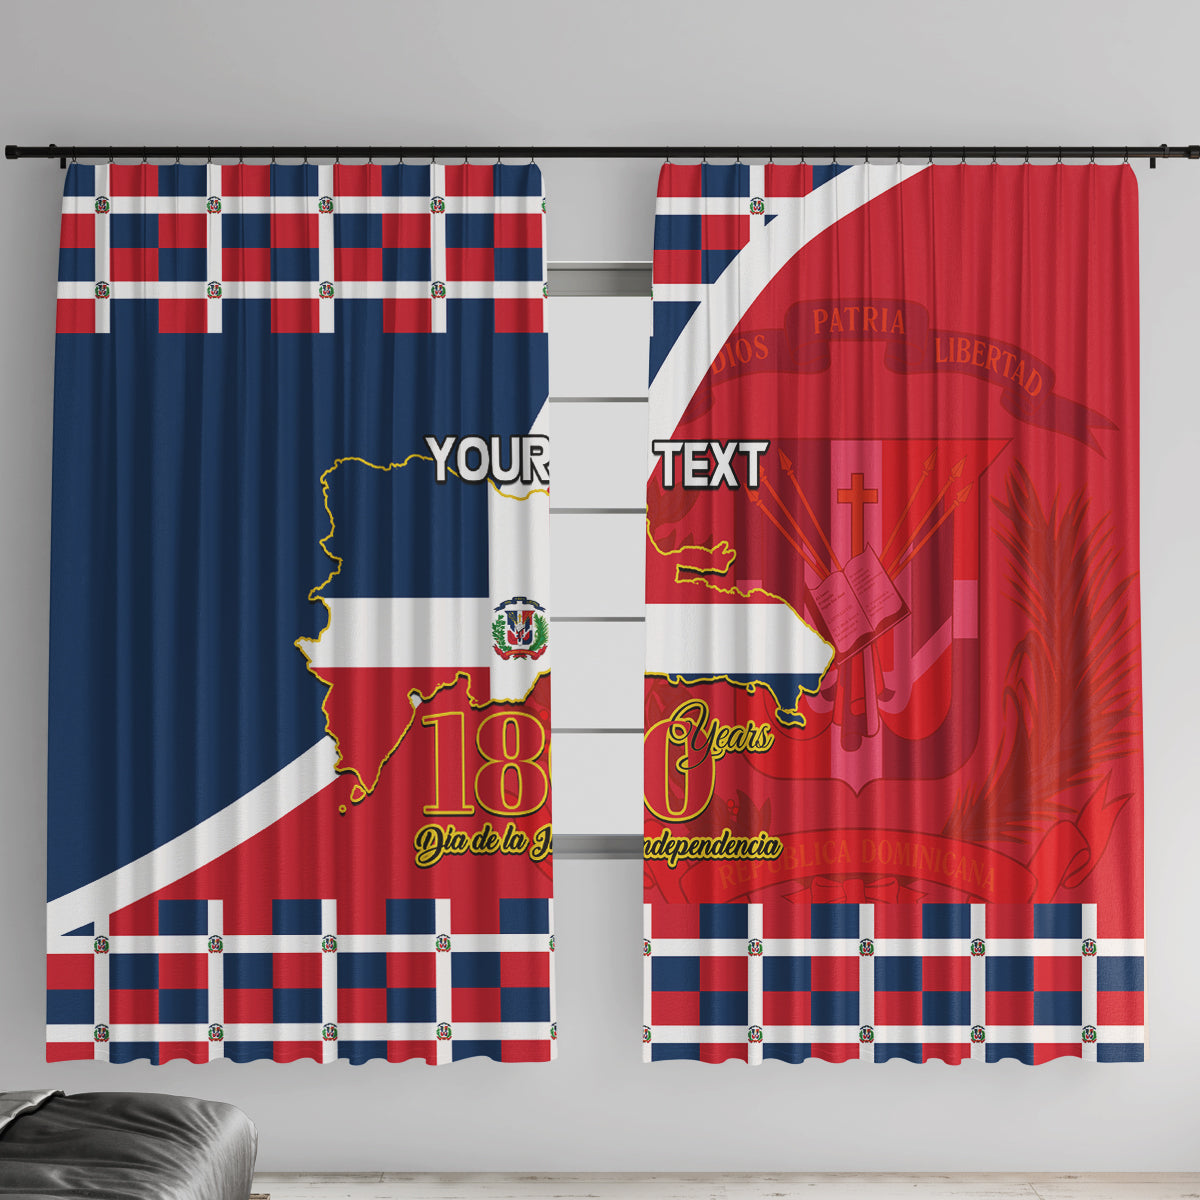 Dominican Republic 180th Years Independence Day Personalized Window Curtain